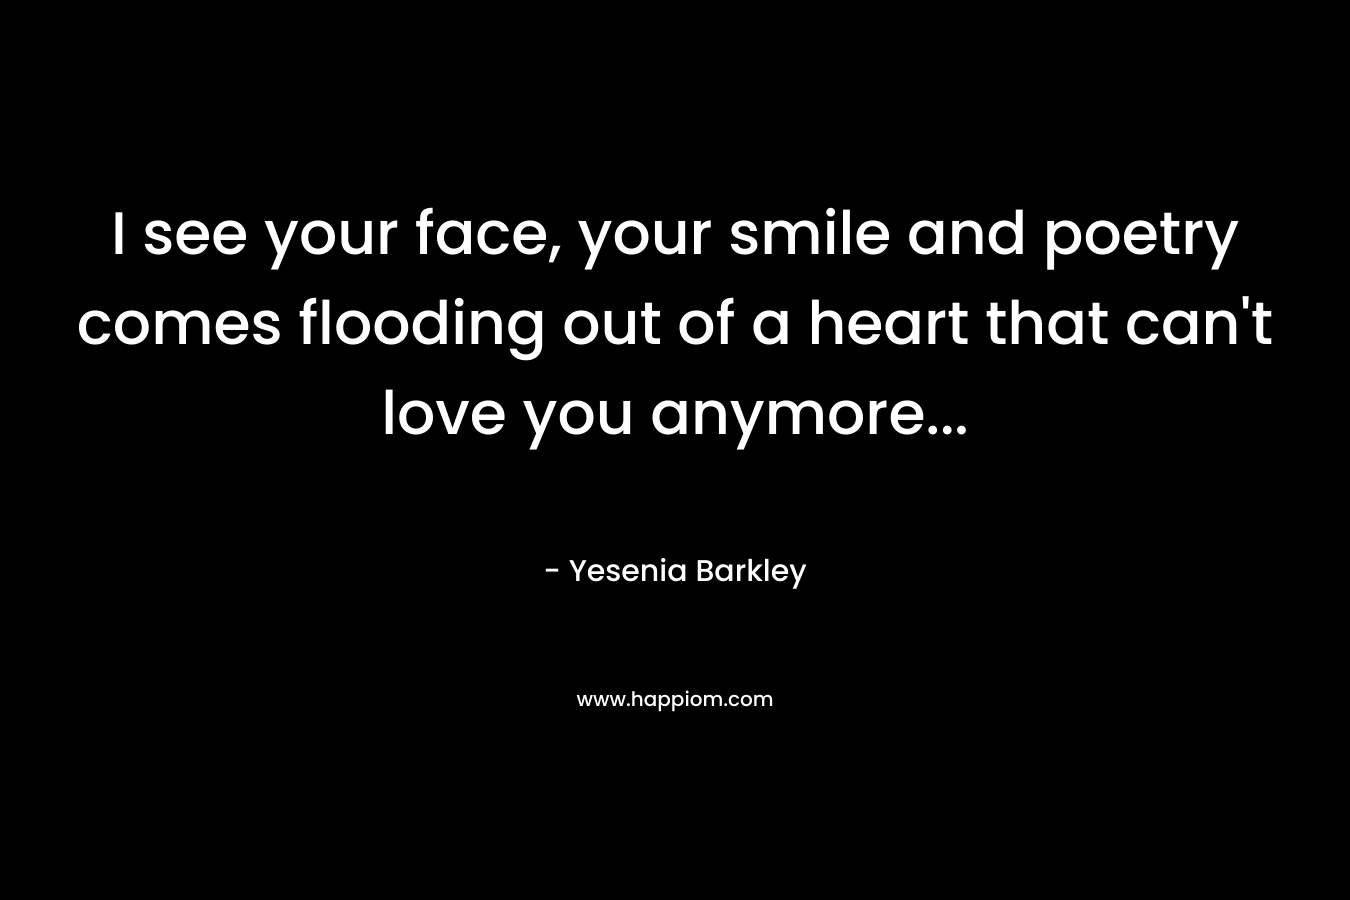 I see your face, your smile and poetry comes flooding out of a heart that can’t love you anymore… – Yesenia Barkley